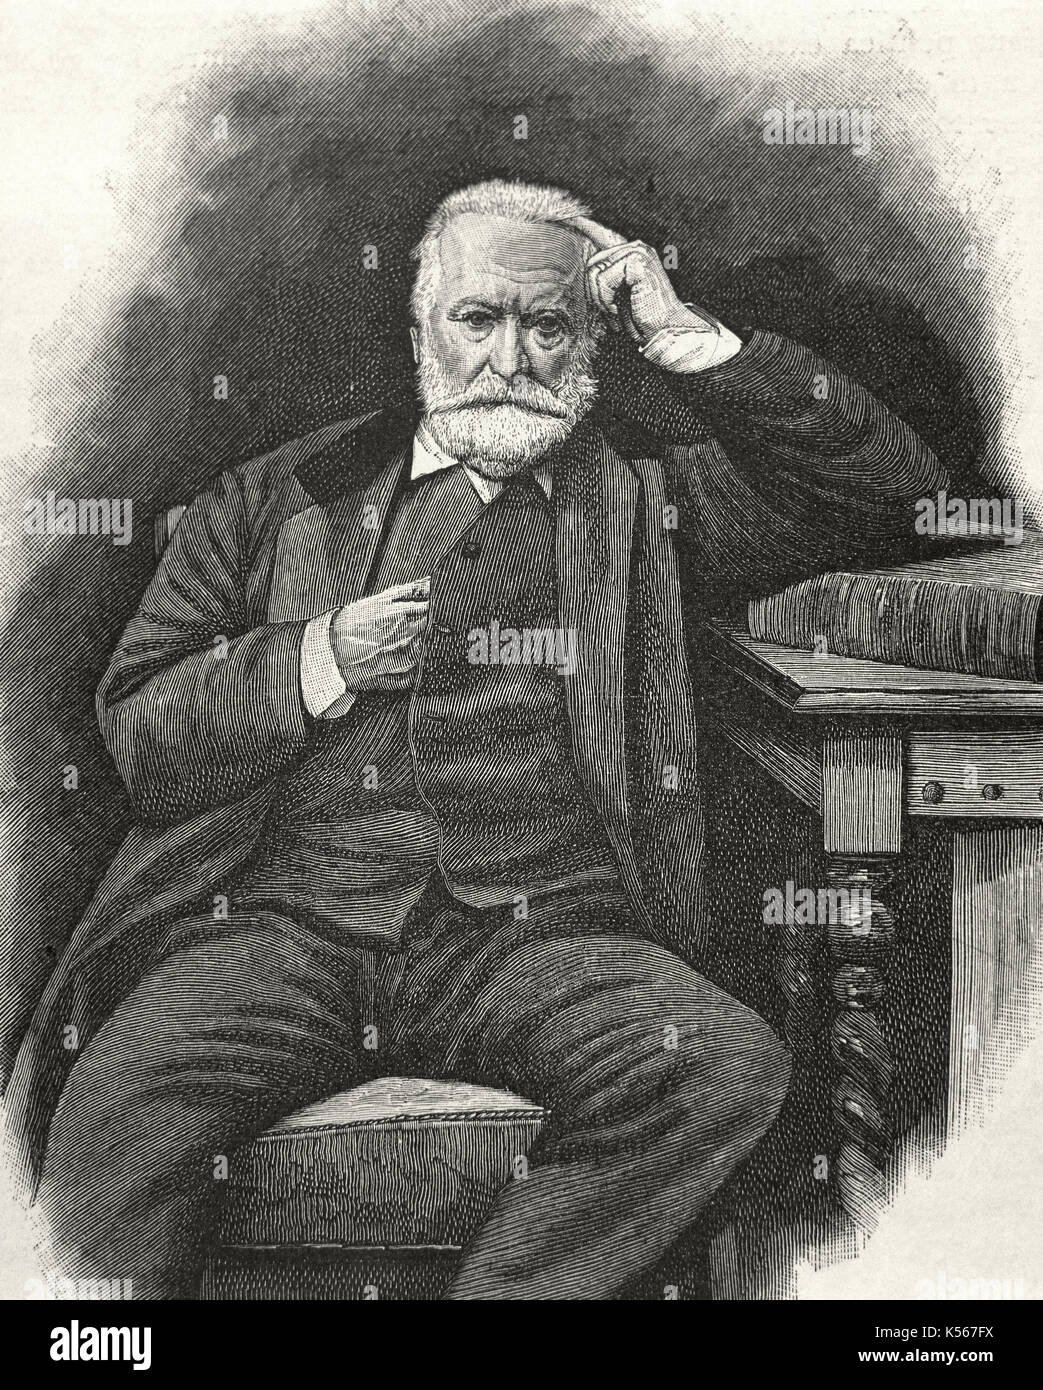 Victor Hugo (1802-1885). French poet and novelist of the Romantic movement. Engraving by P. Rajon. Stock Photo